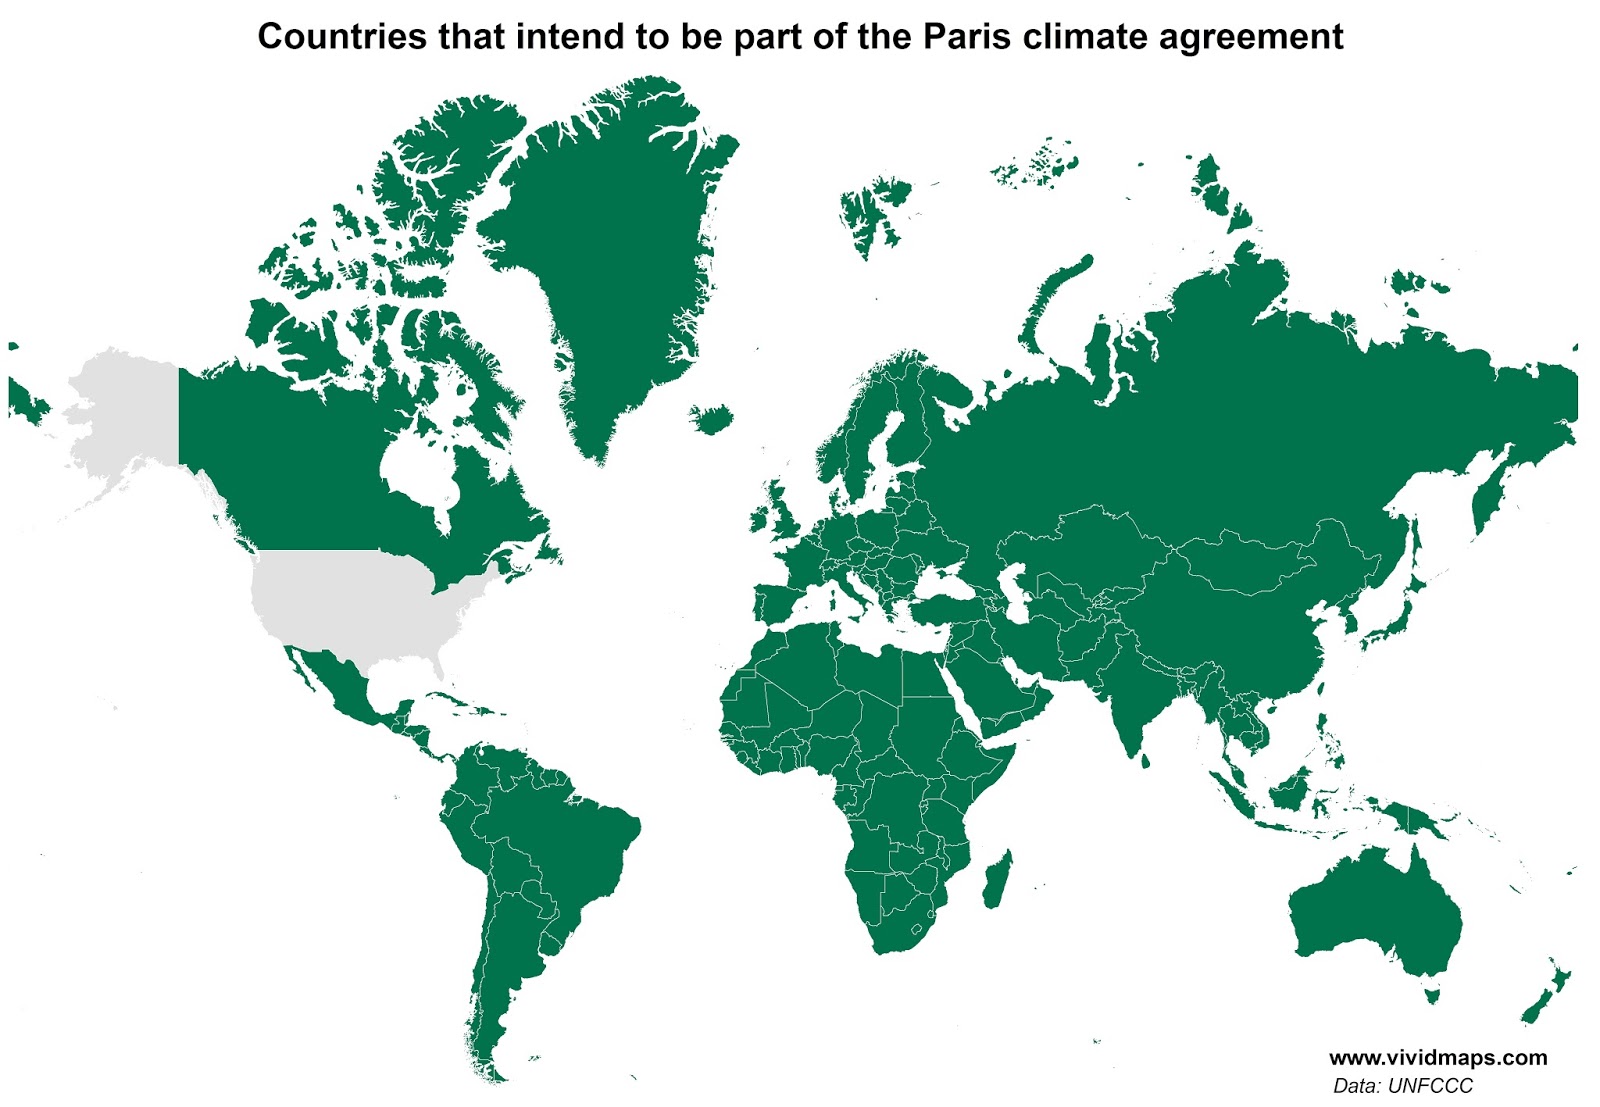 All countries have signed Paris agreement except the U.S. Ecoclimax